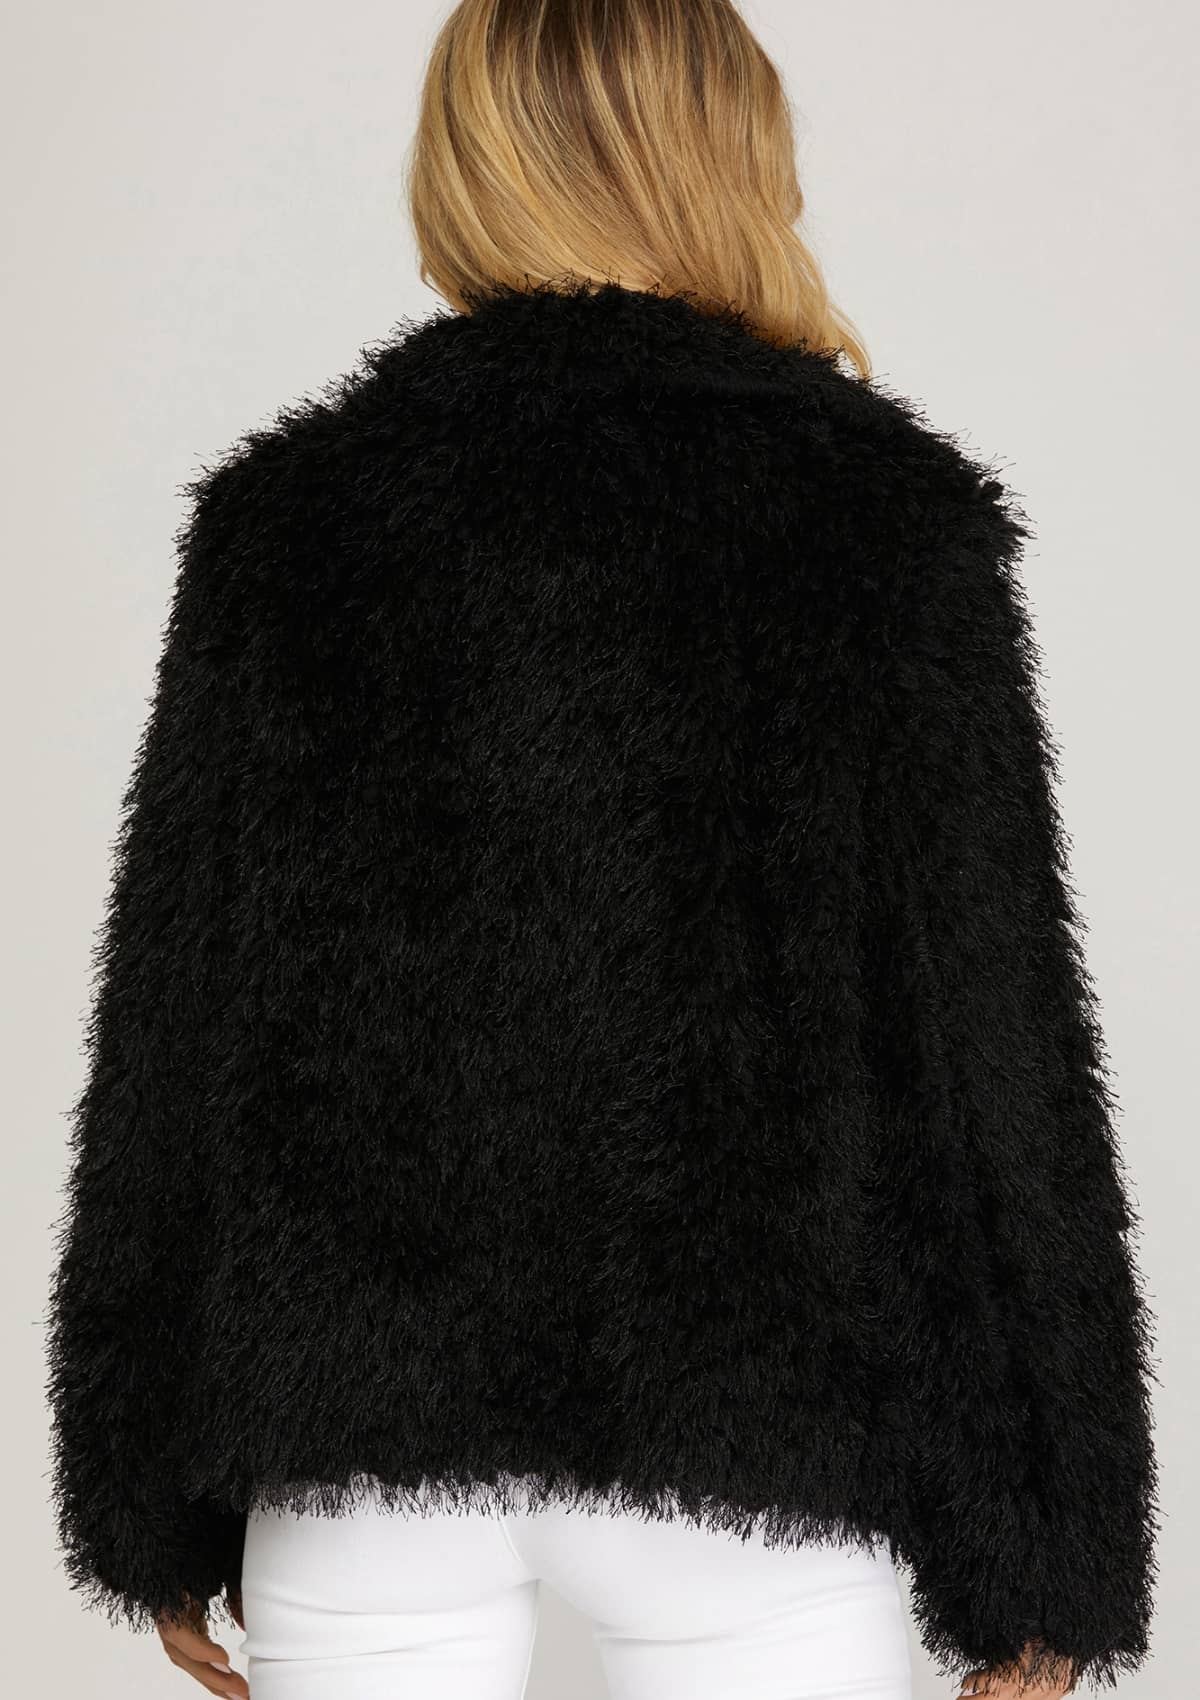 Long Sleeve Faux Fur Jacket With Pockets, Black